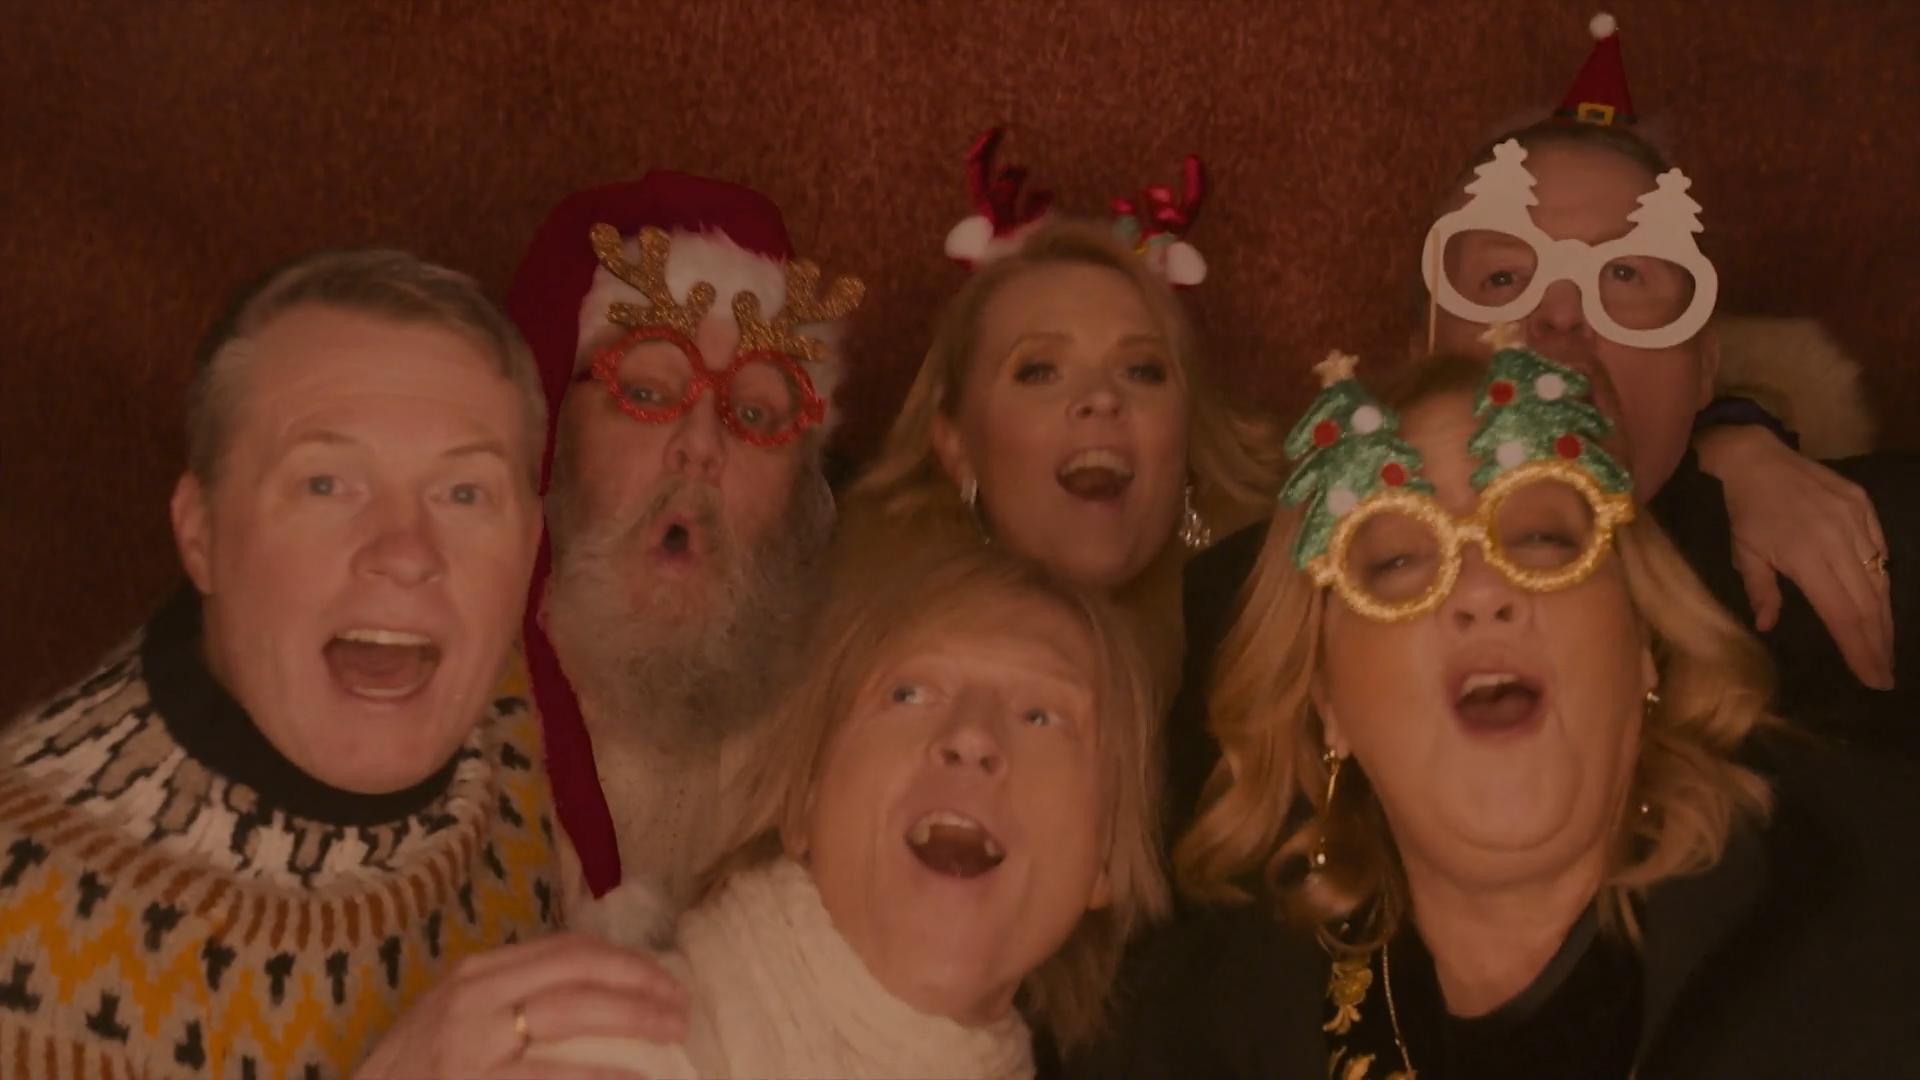 Exklusive Preview des neuen Weihnachts-Videos The Kelly Family